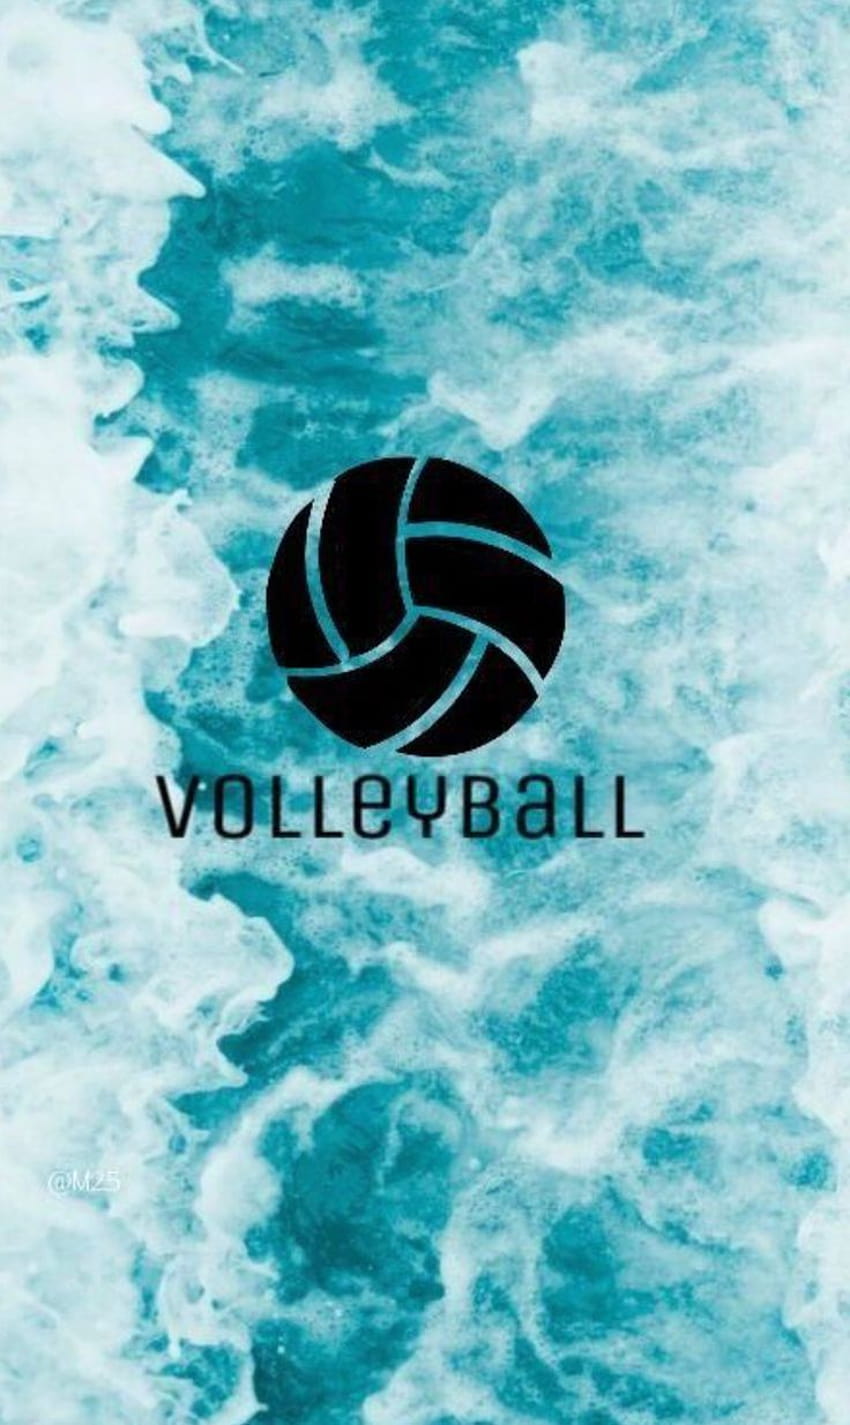 Volleyball Logo Clipart, HD Png Download , Transparent Png Image - PNGitem